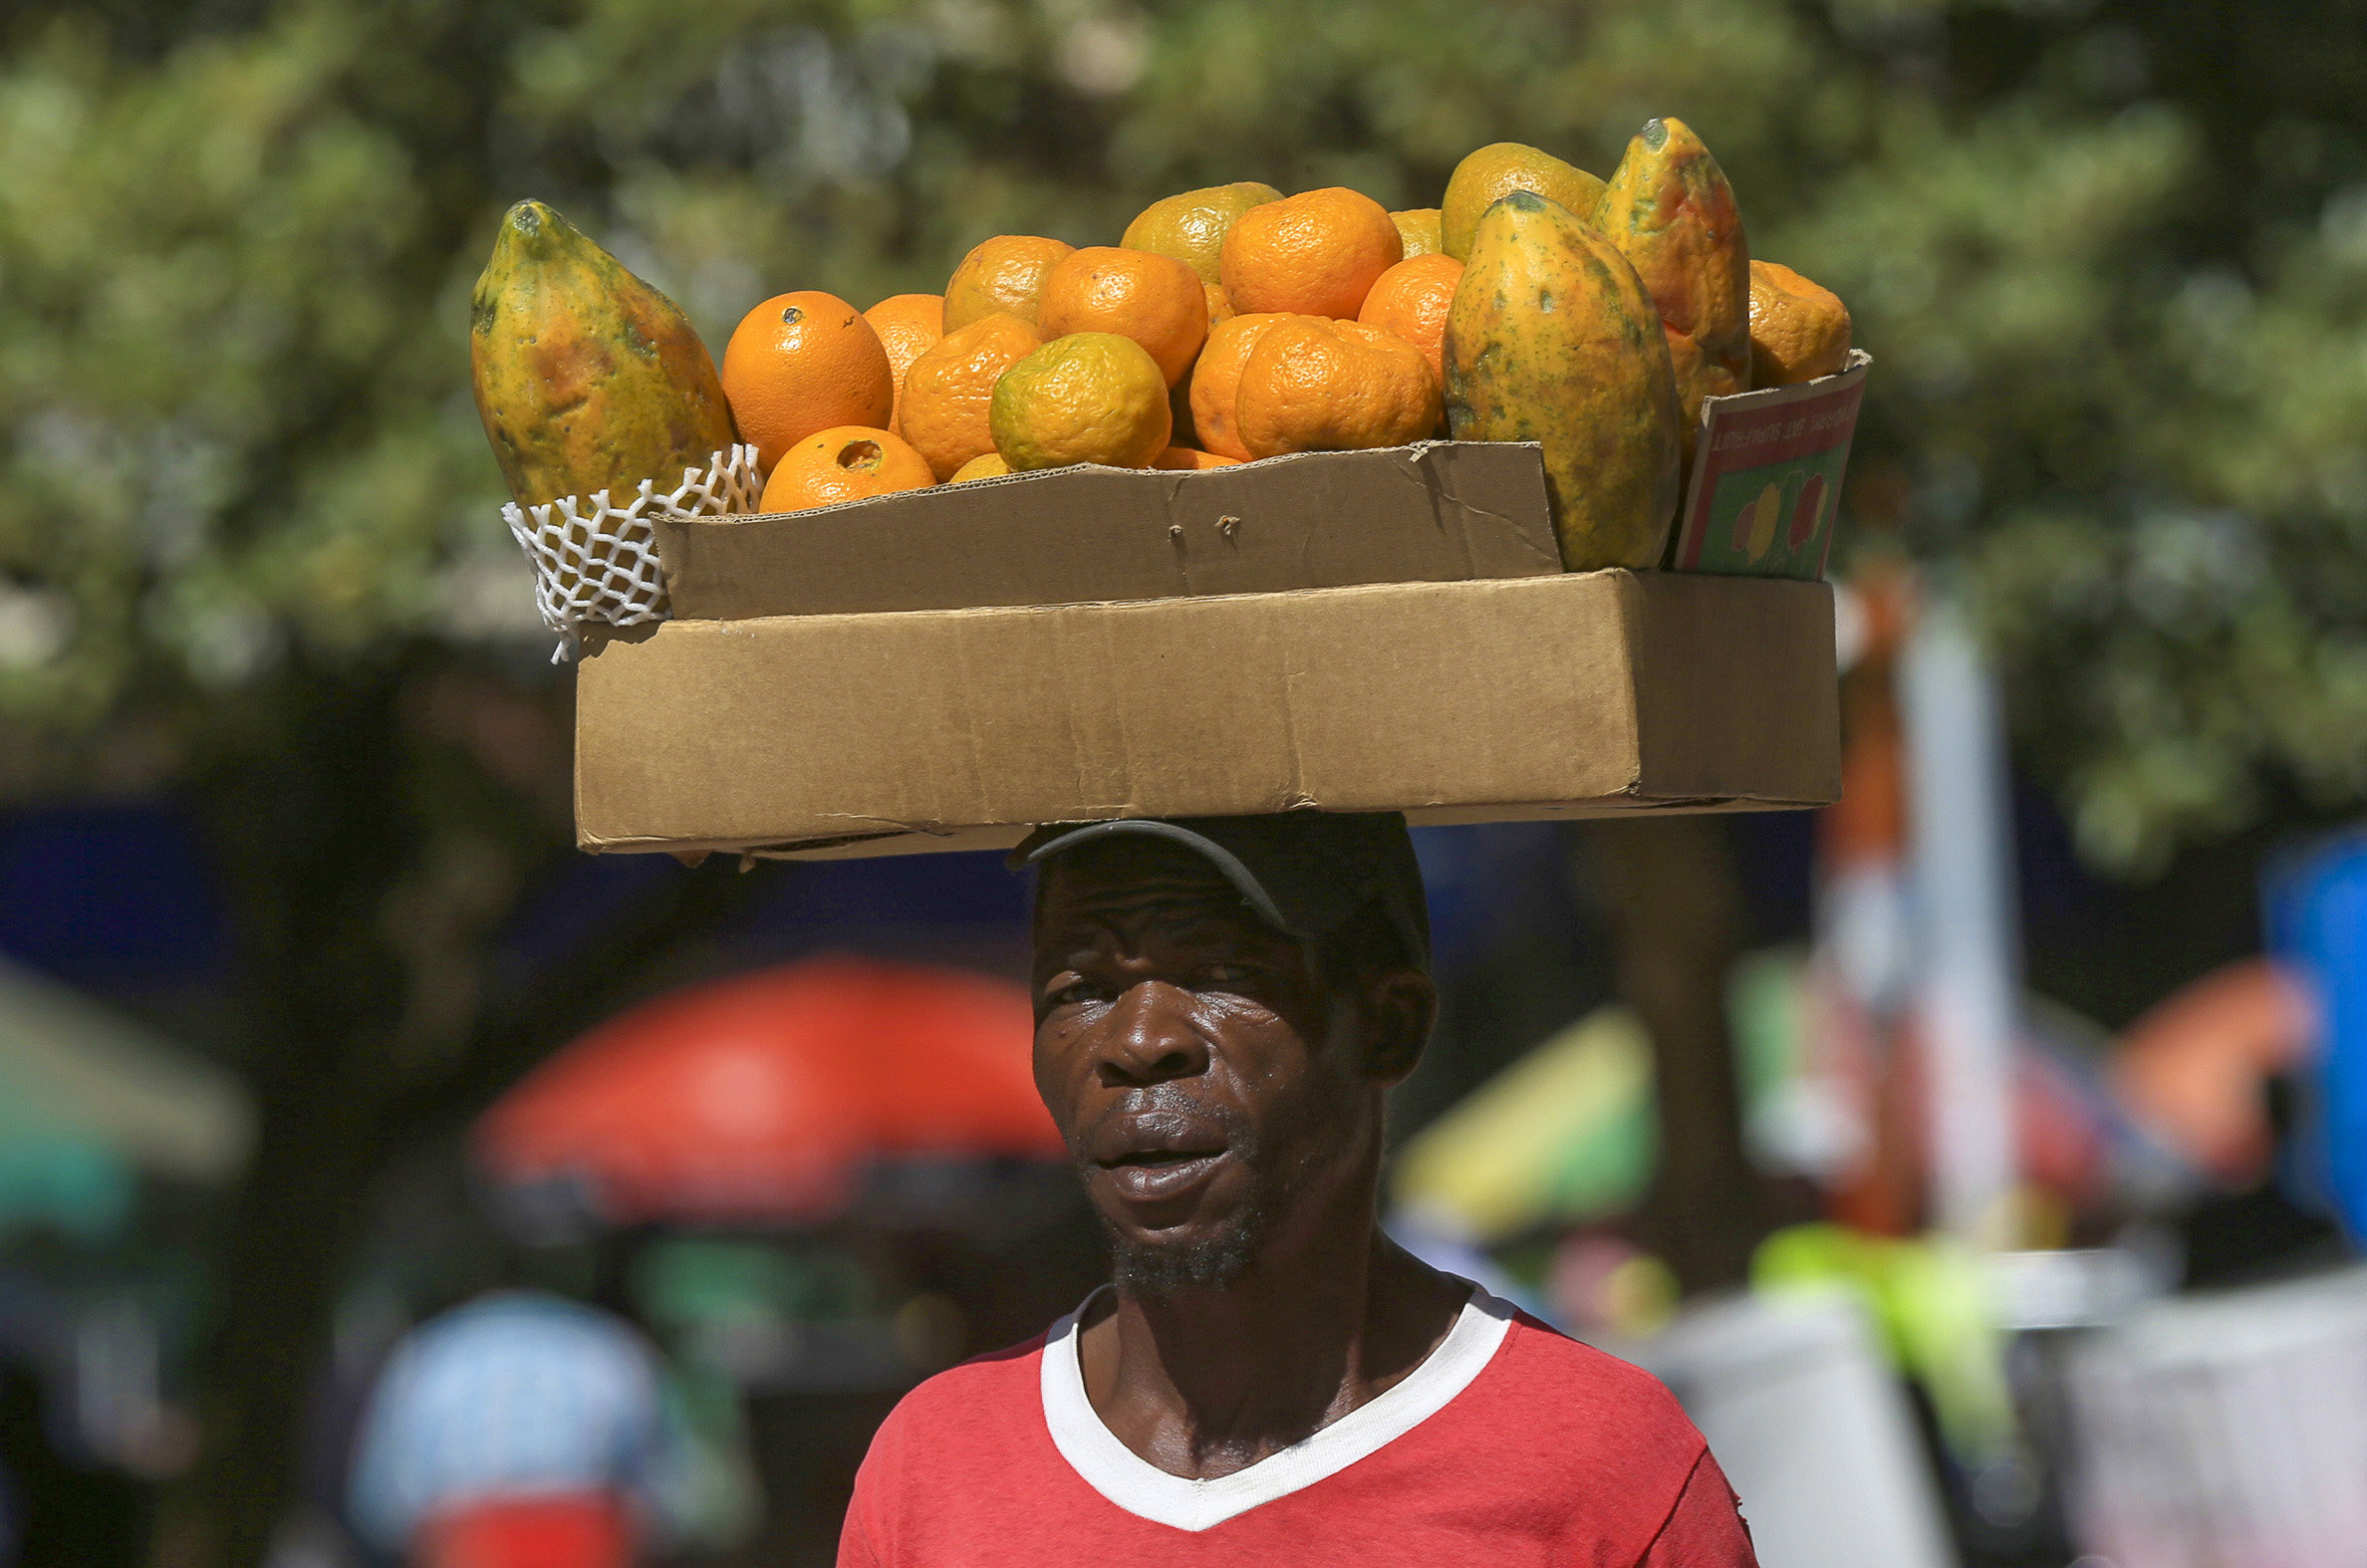 A group of Zimbabwean citrus growers and distributors has been granted access to export fresh fruit to China. EPA-EFE